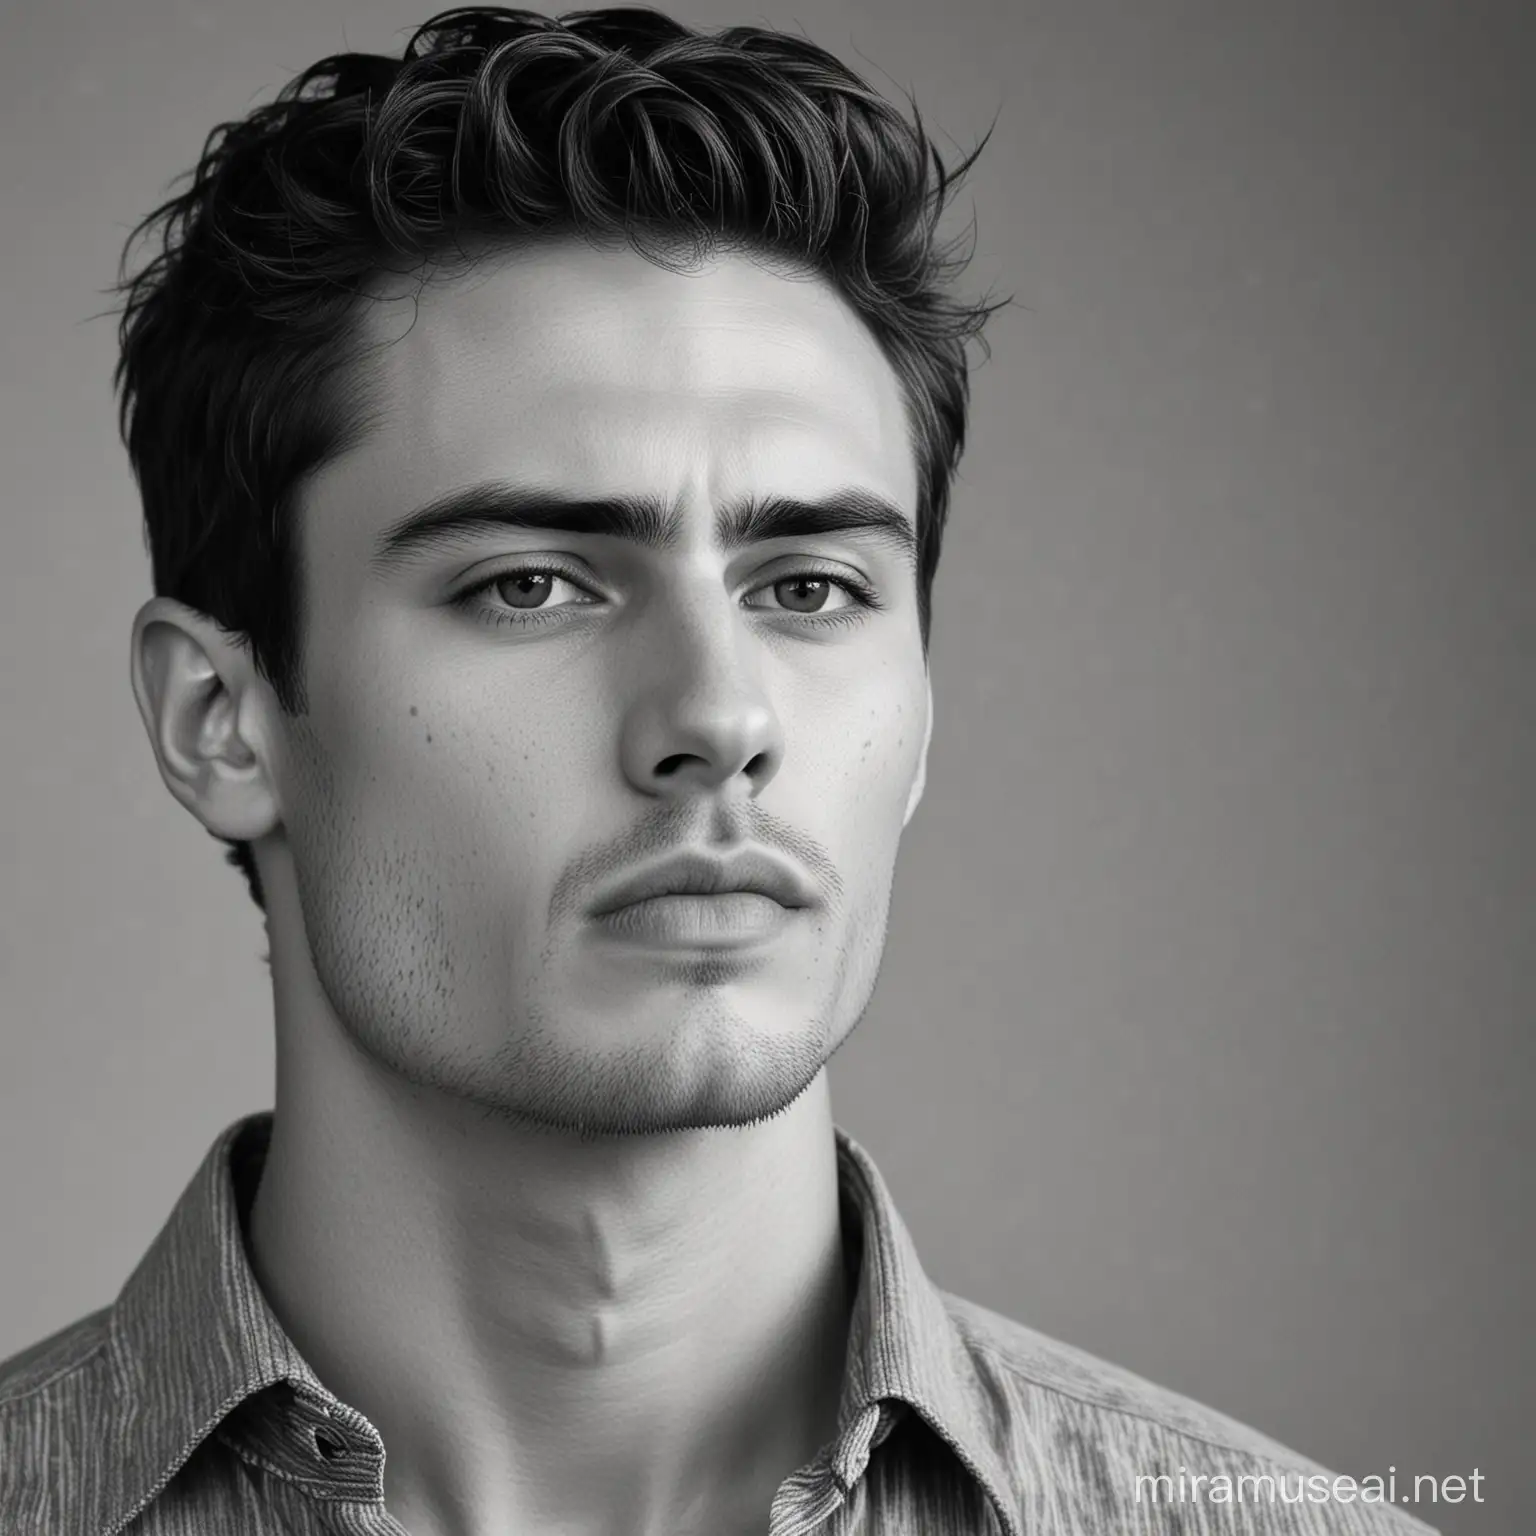 Dramatic Black and White Portrait of a Young Handsome Man with a Sharp Jawline